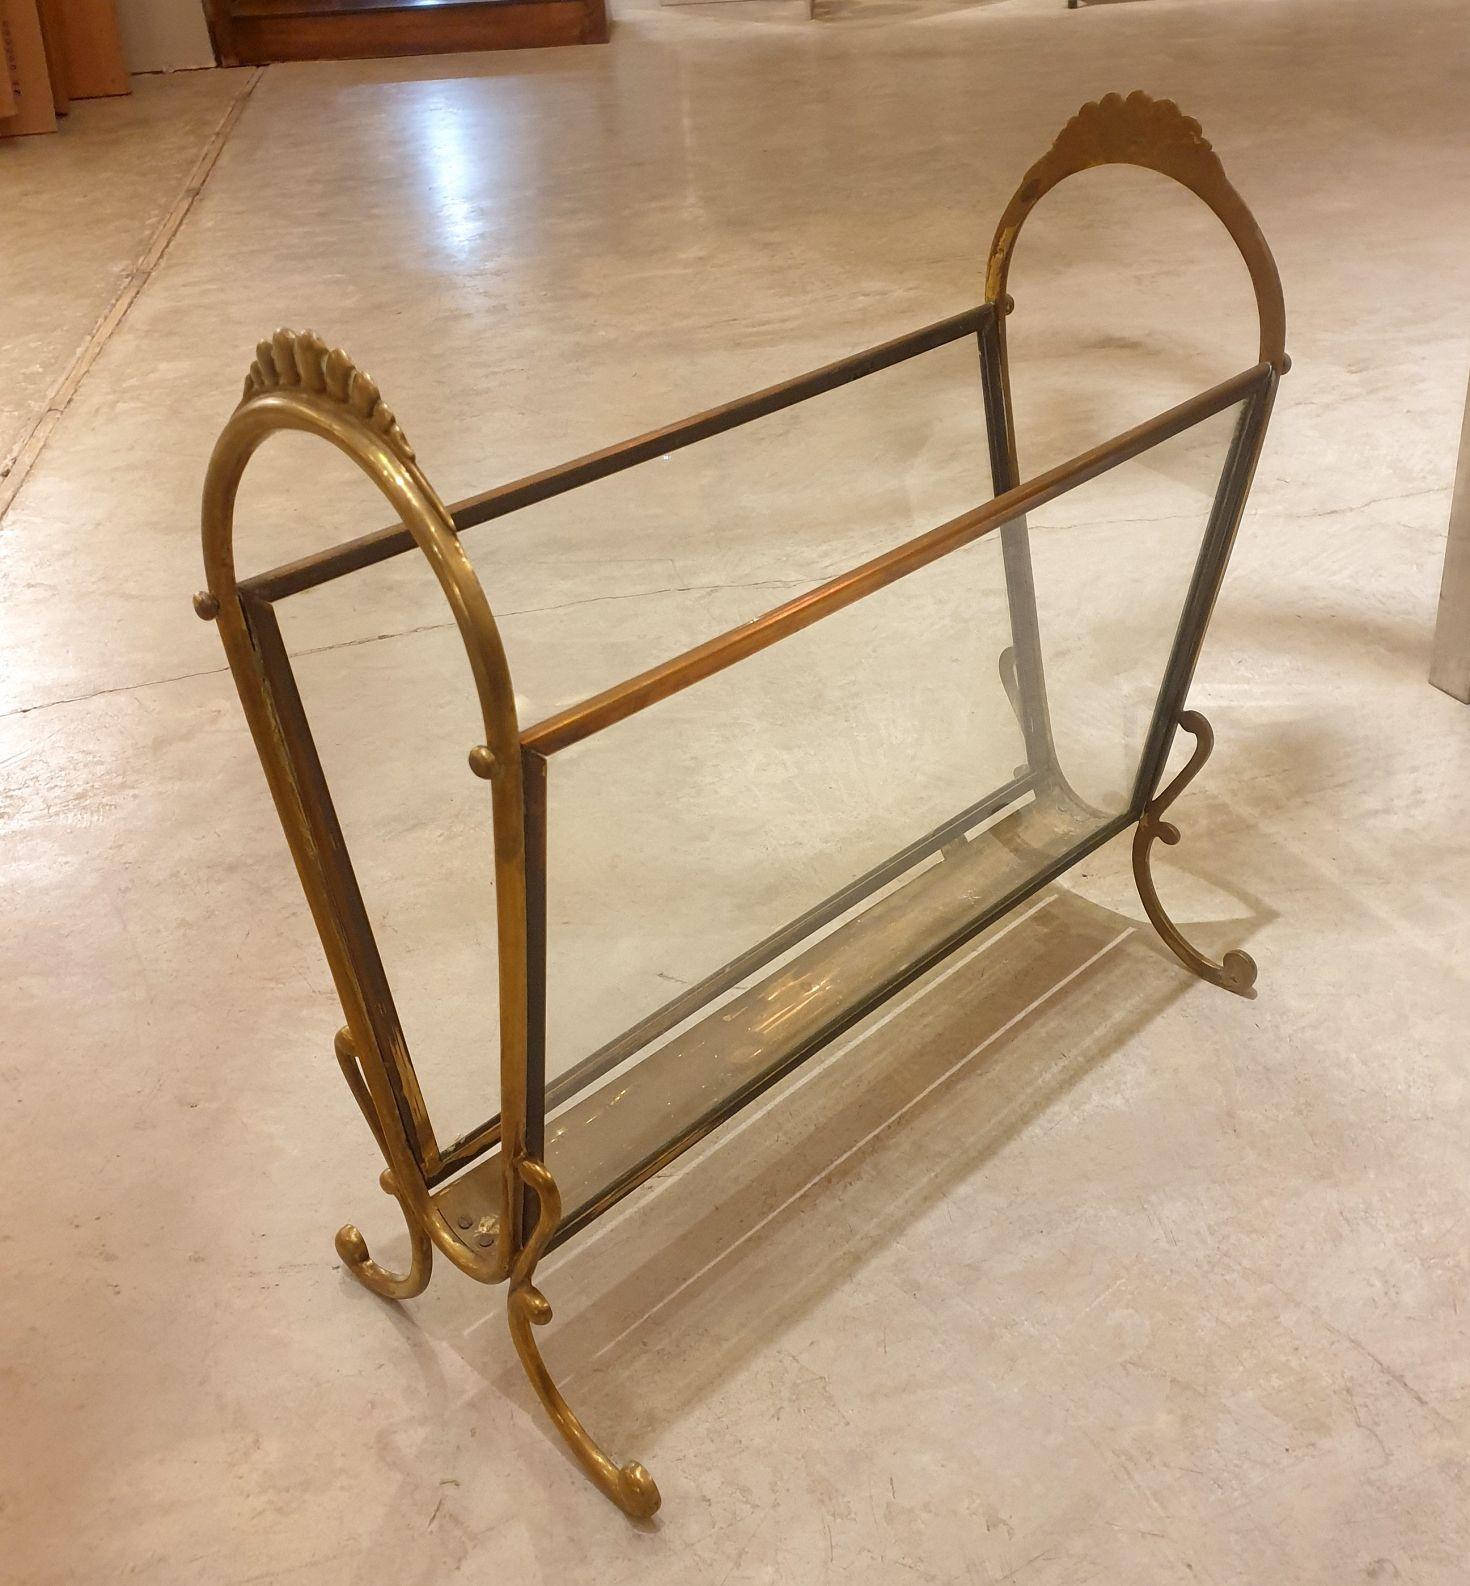 Mid century modern magazine holder, Italy 1950s.
The vintage rack is made of brass mounts and glass sides.
The design is simple and elegant.
Some nice patina on the brass: normal with age.
Excellent condition.